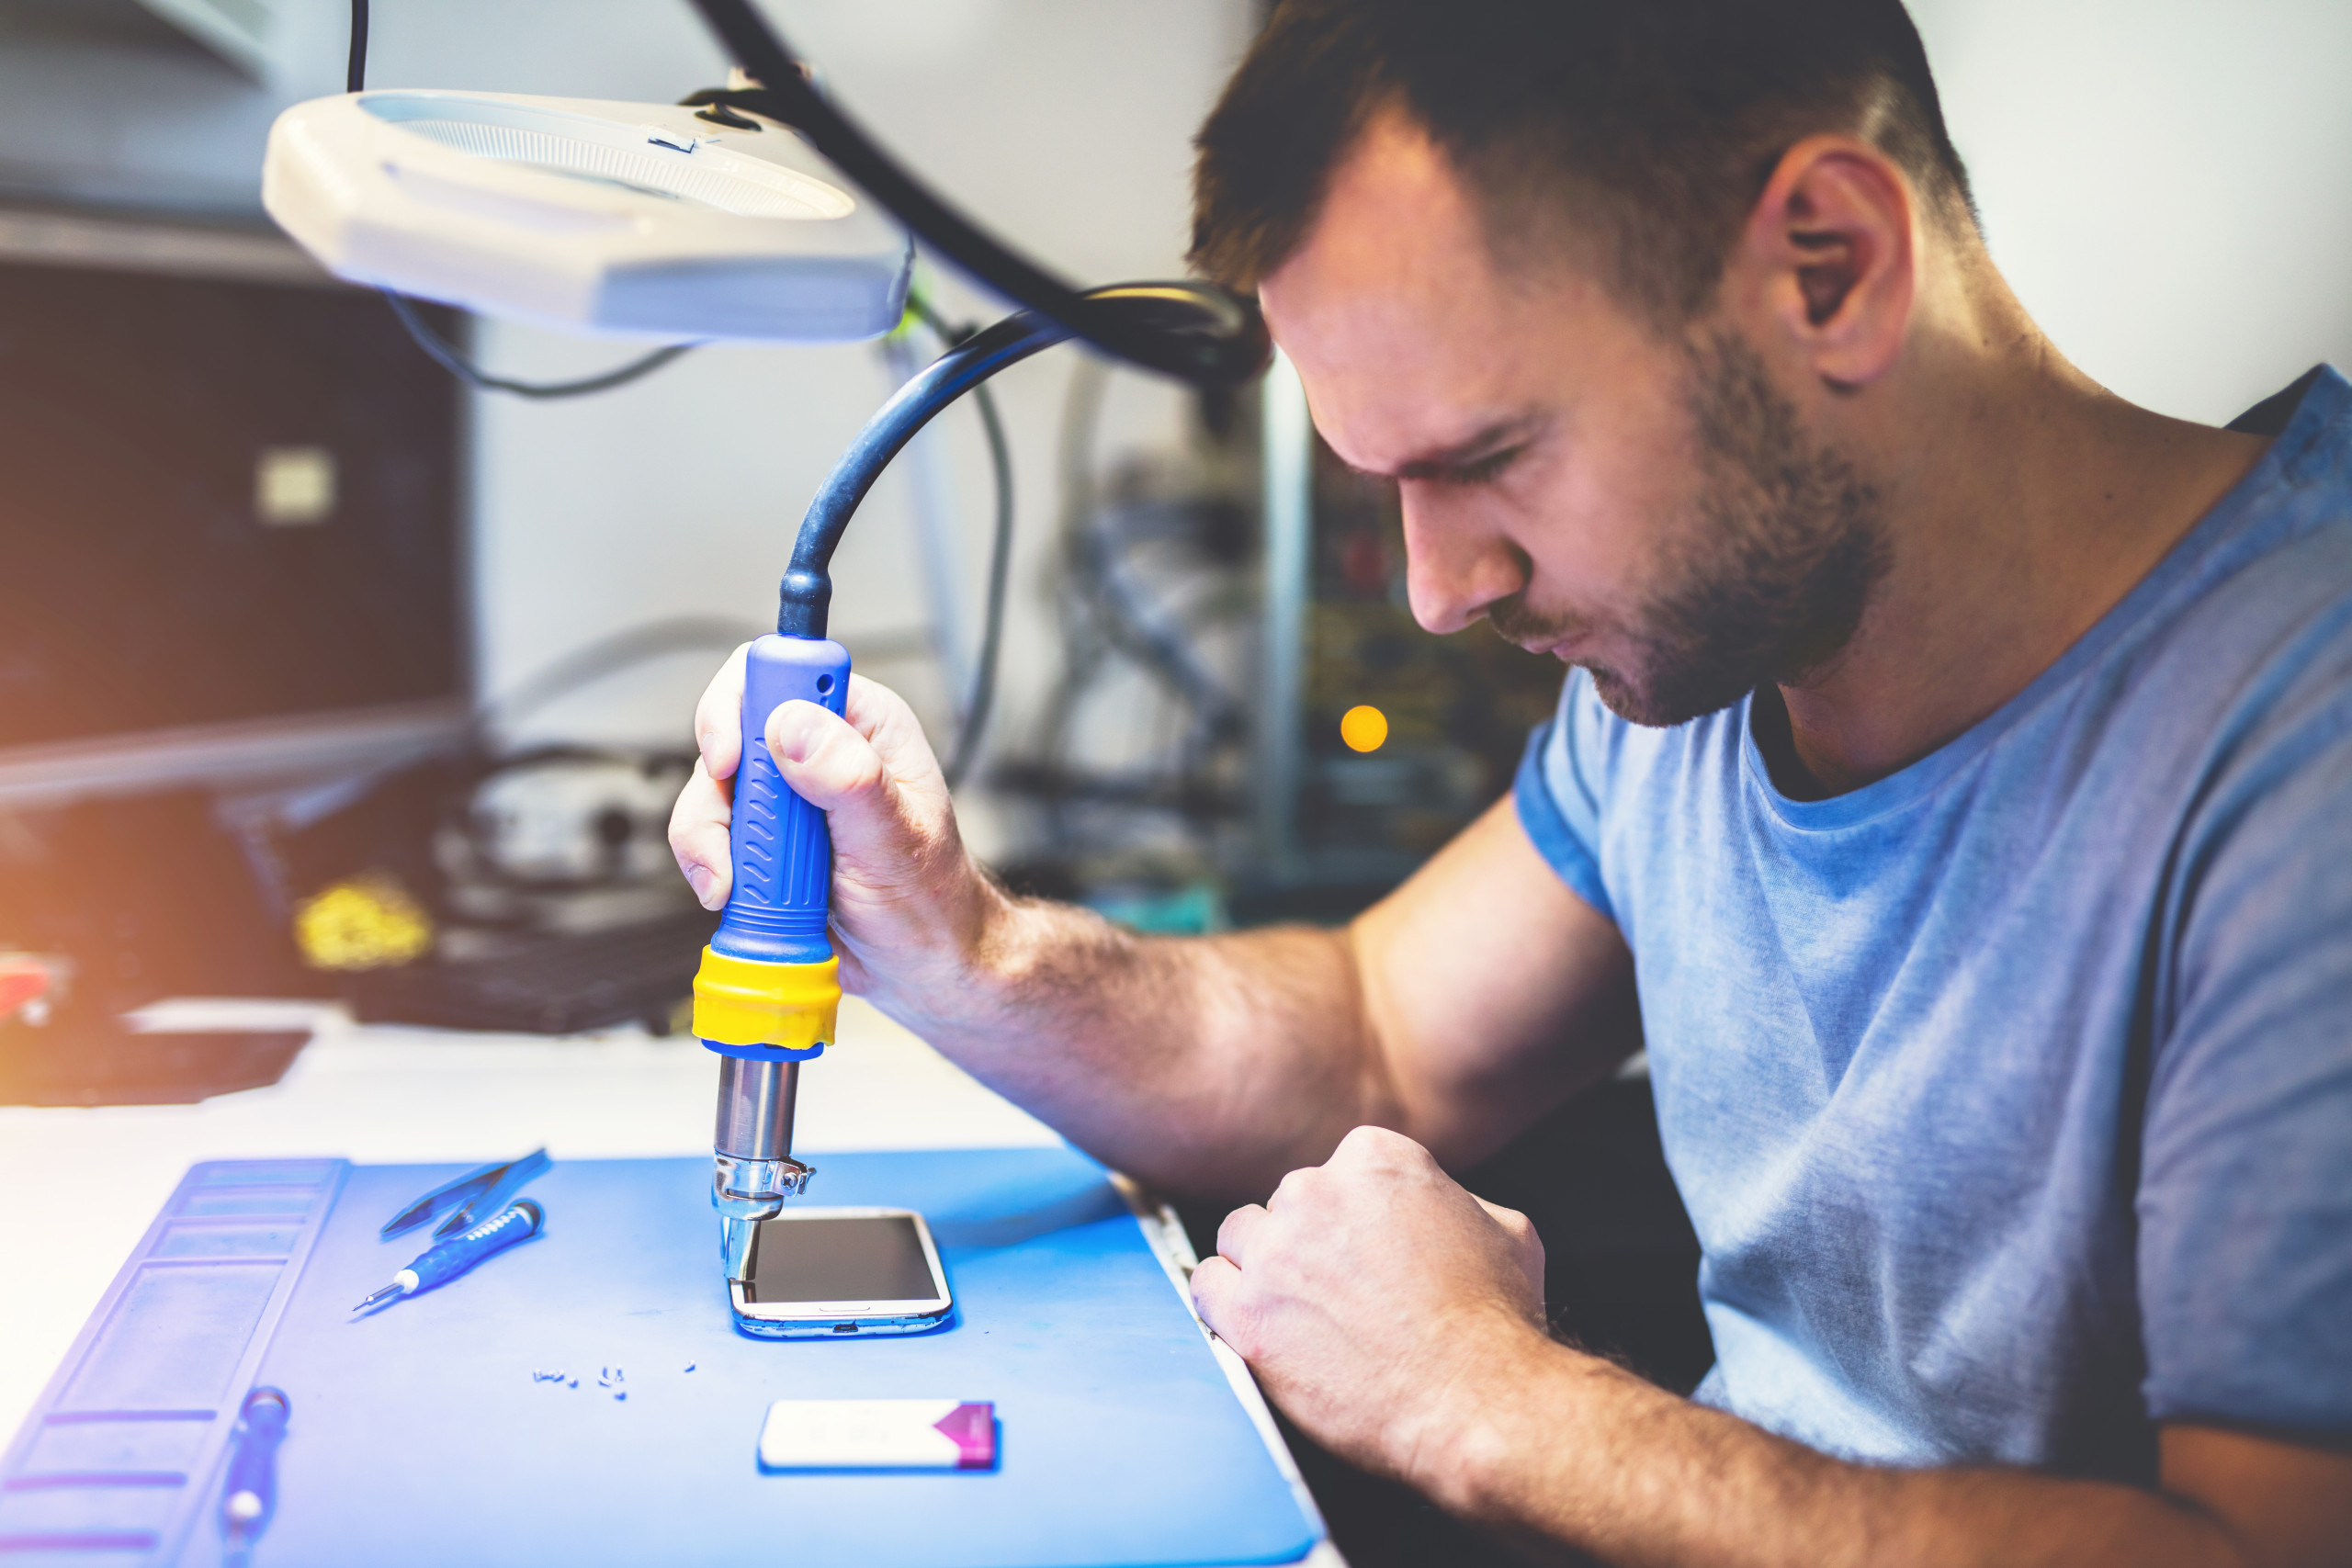 man repairing smartphone at workplace to resolve common Issues